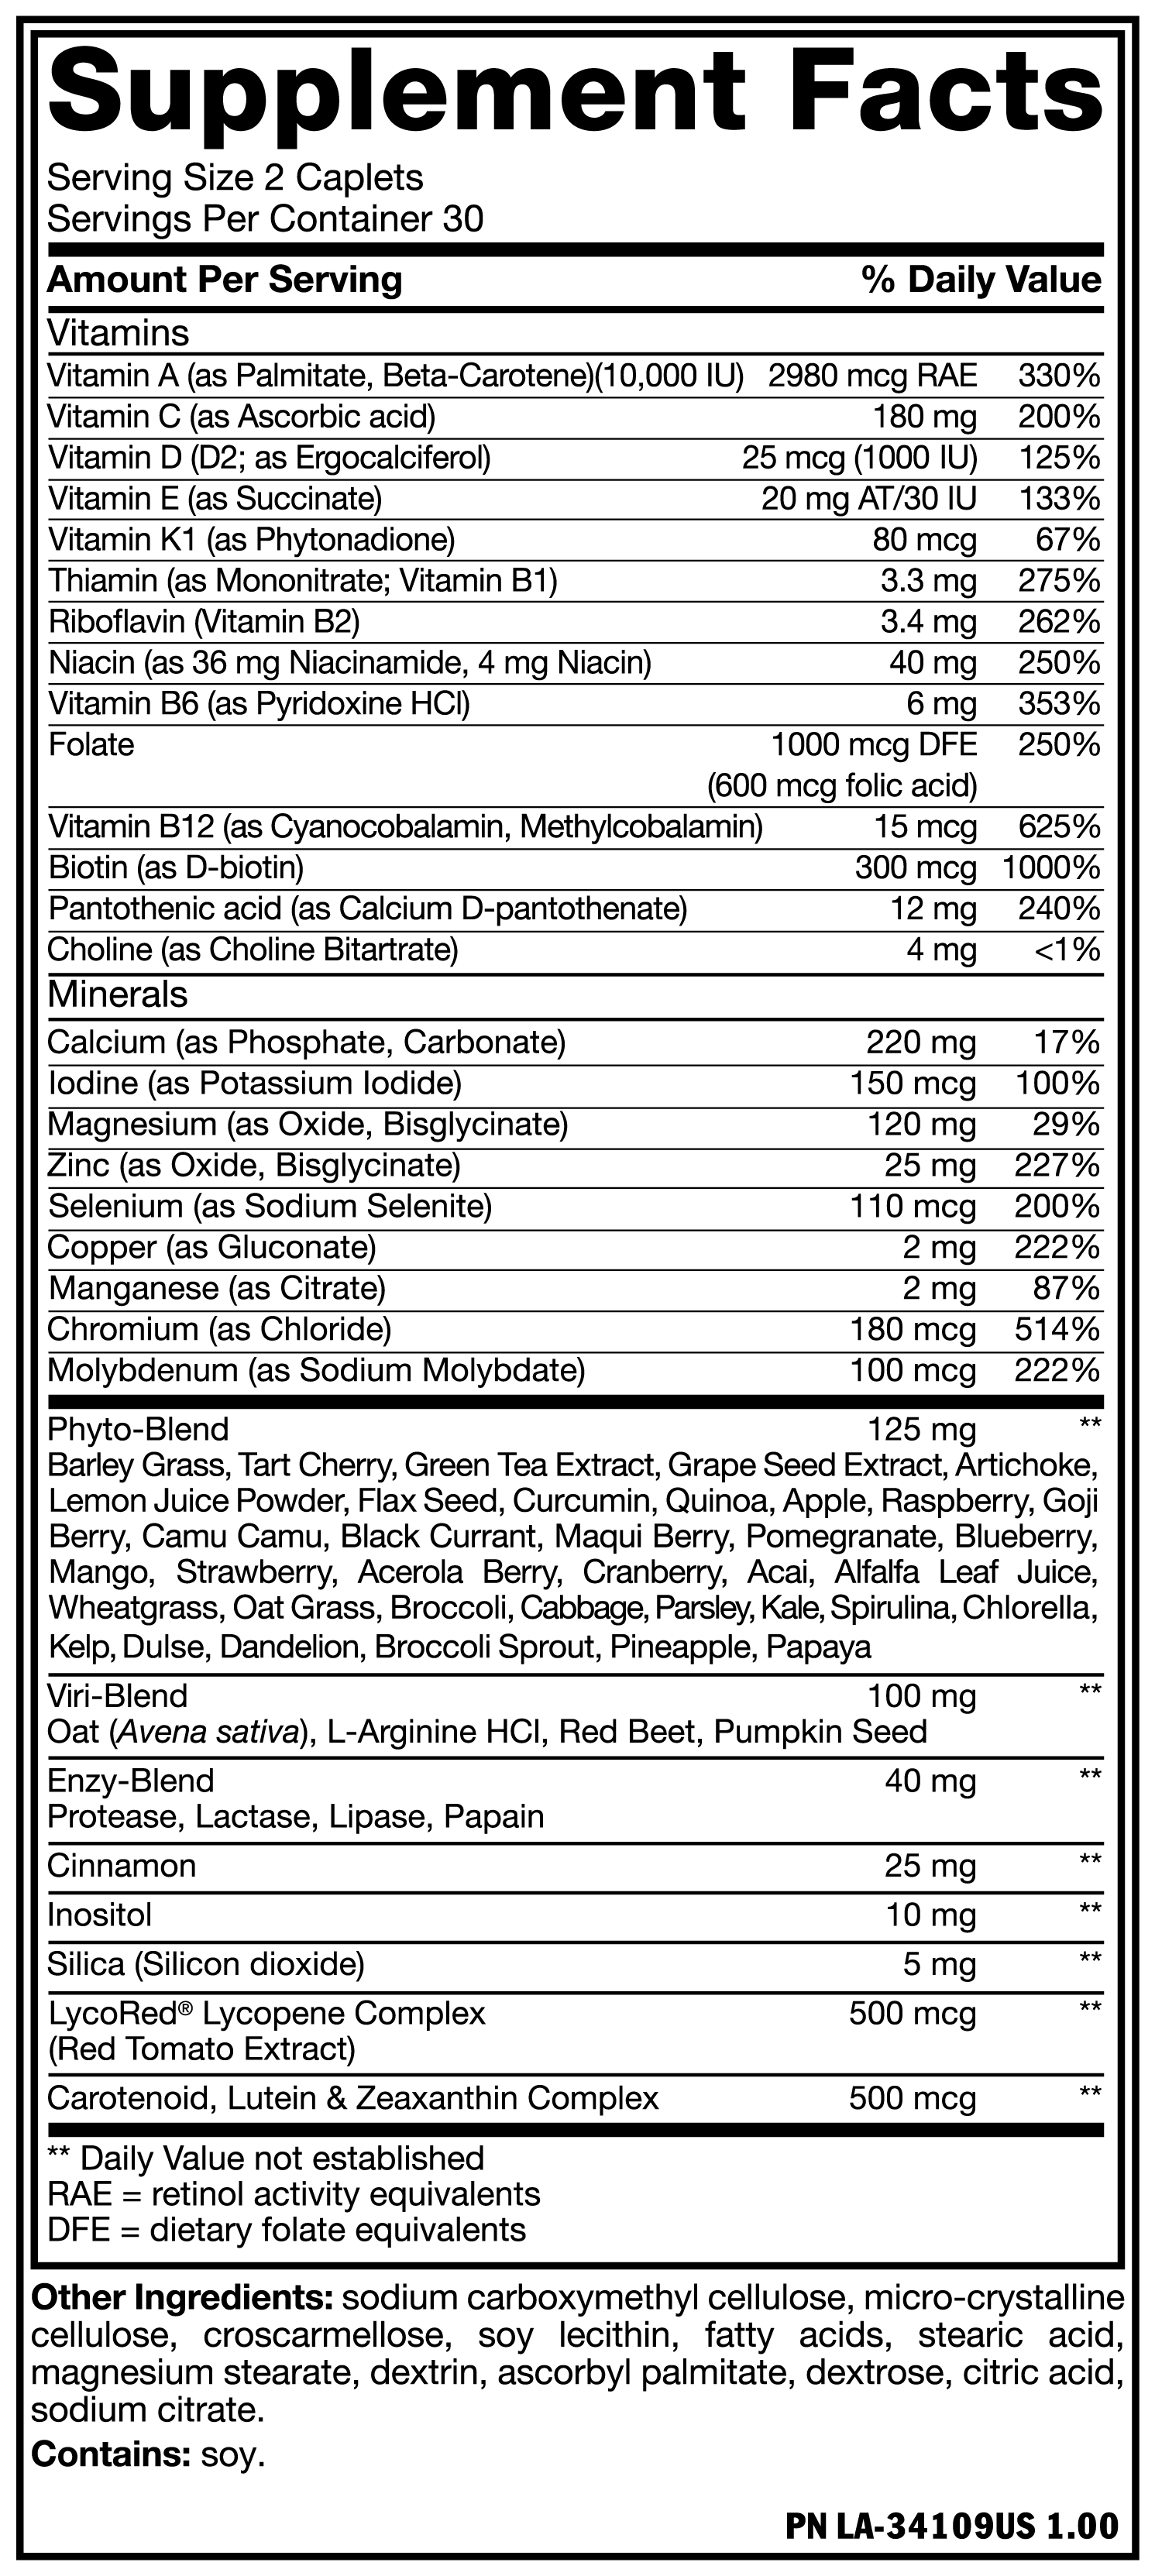 Supplement facts infographic with list of vitamins, minerals and other ingredients for 30 servings. Contains items like Vitamins A, C, D, E, K1 and B complex, calcium, iodine, biotin and zinc. Also includes plant-based extracts such as barley grass, tart cherry, and green tea. Contains soy.